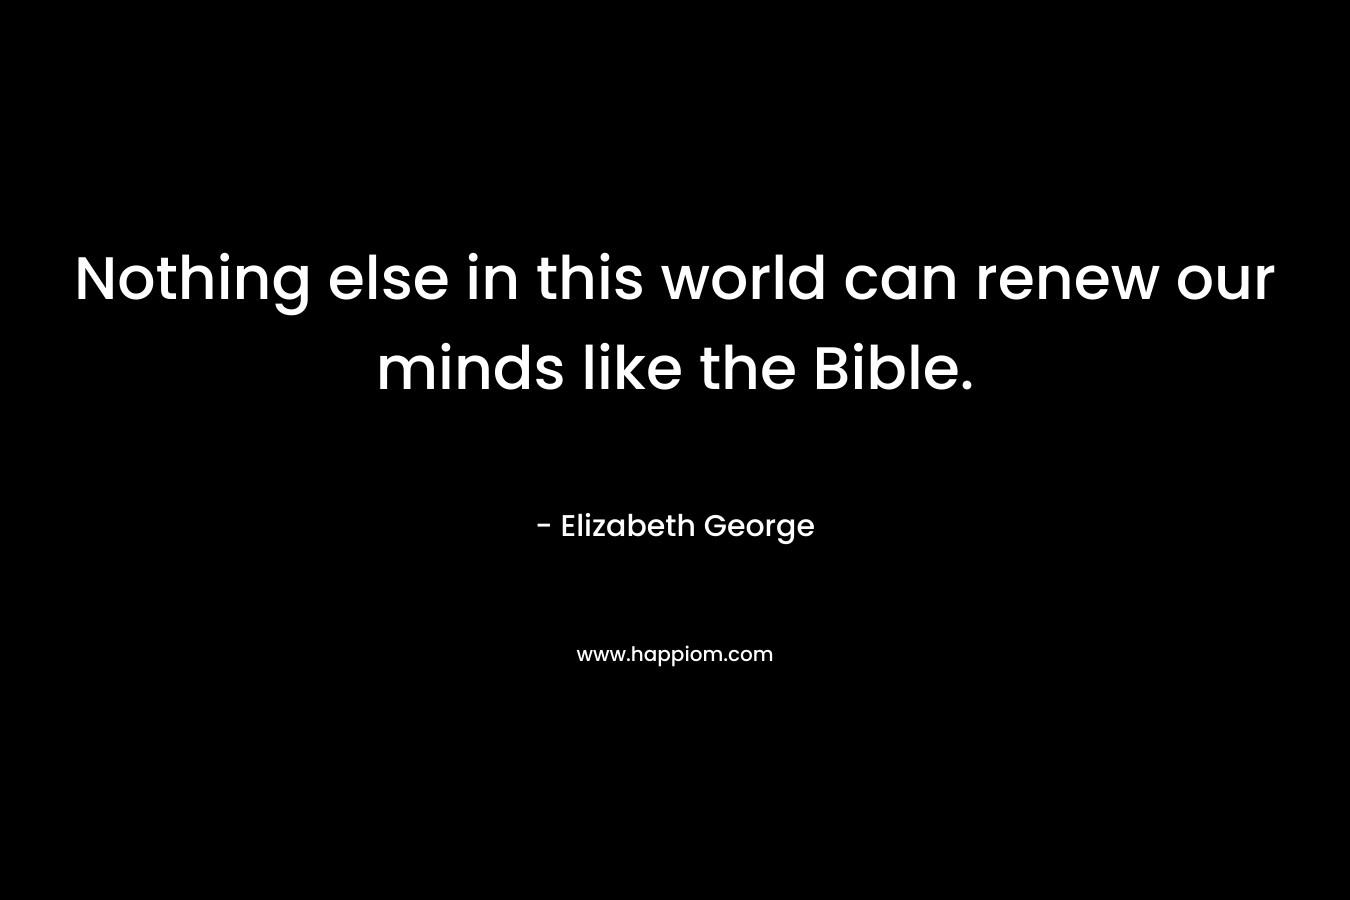 Nothing else in this world can renew our minds like the Bible.